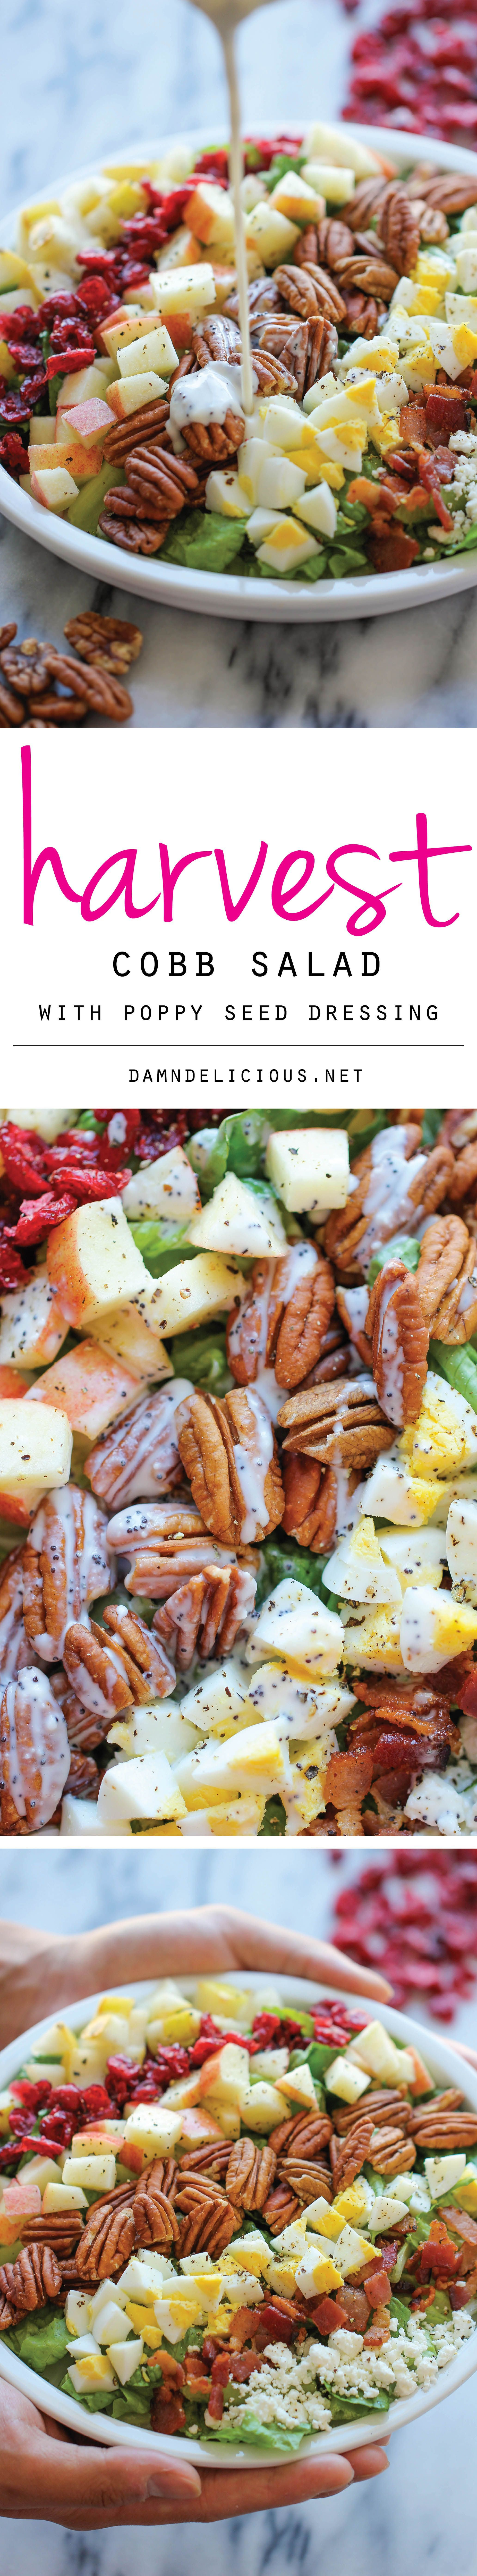 Harvest Cobb Salad – The perfect fall salad with the creamiest poppyseed salad d